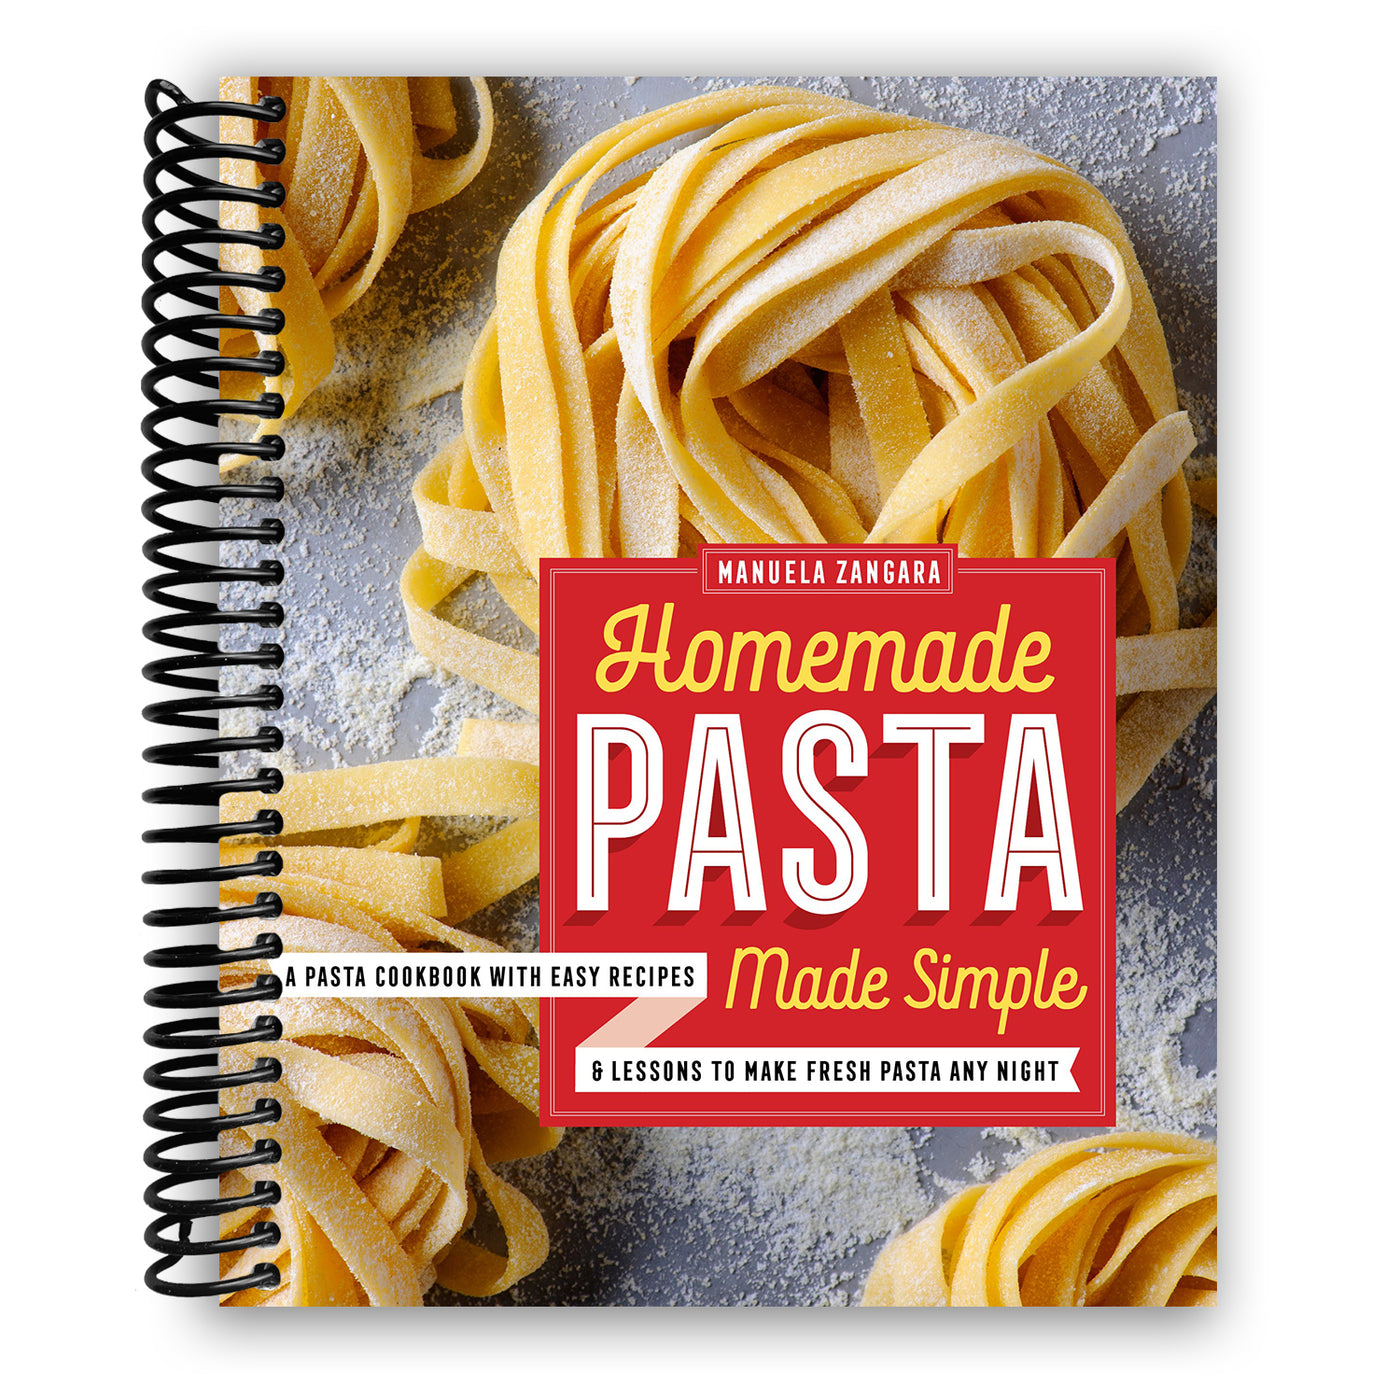 Homemade Pasta Made Simple: A Pasta Cookbook with Easy Recipes & Lessons to Make Fresh Pasta Any Night (Spiral Bound)